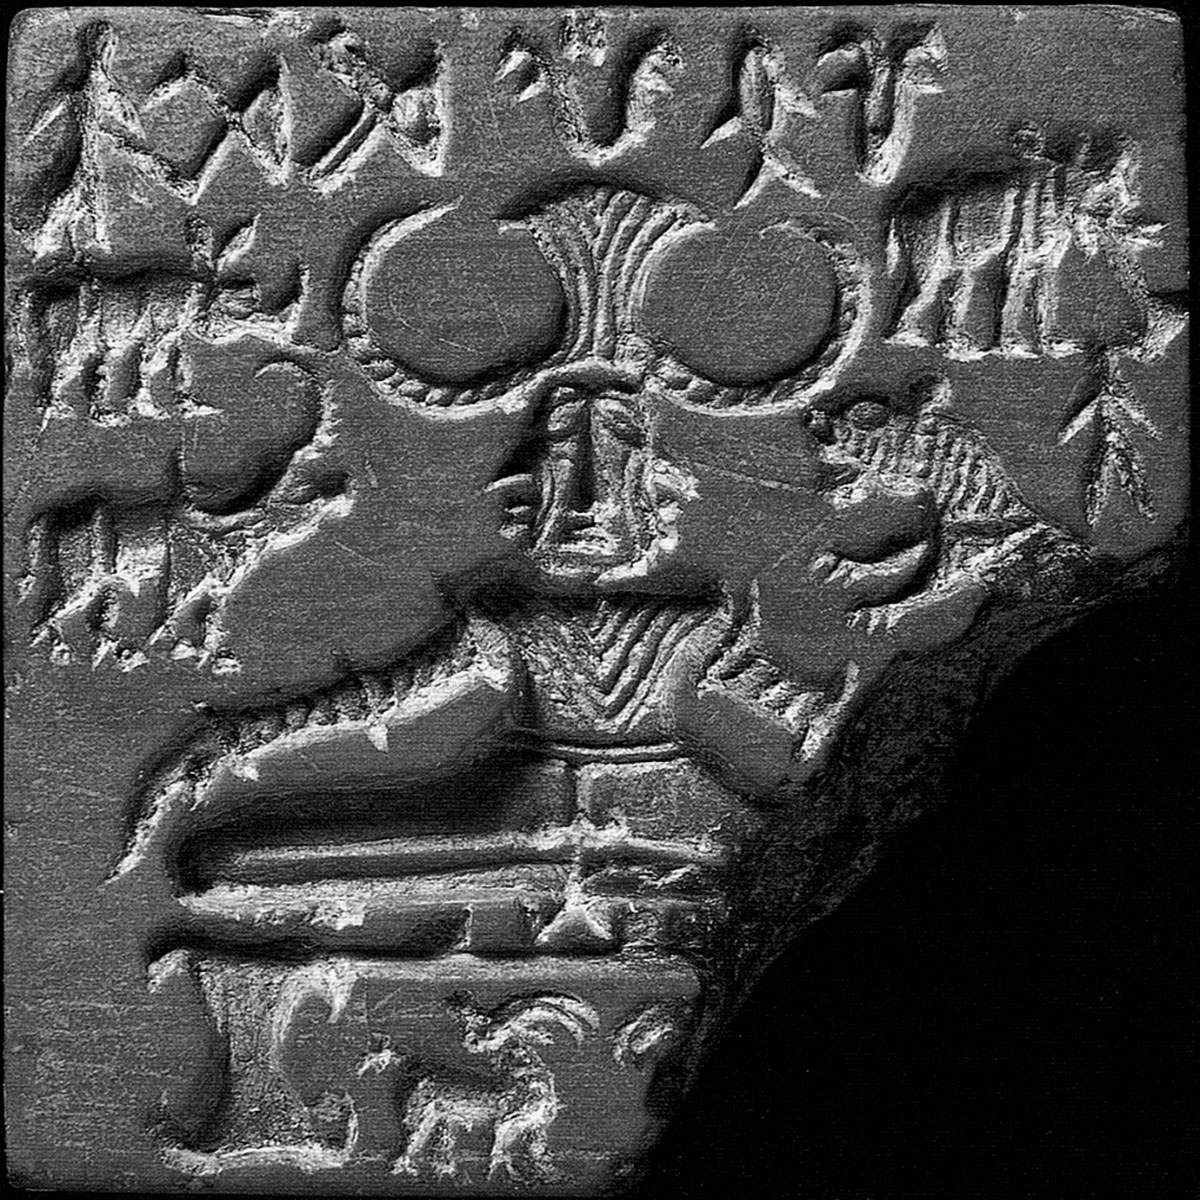 A steatite seal depicting a seated figure with tricephalic features and surrounded by animals and the Indus script.